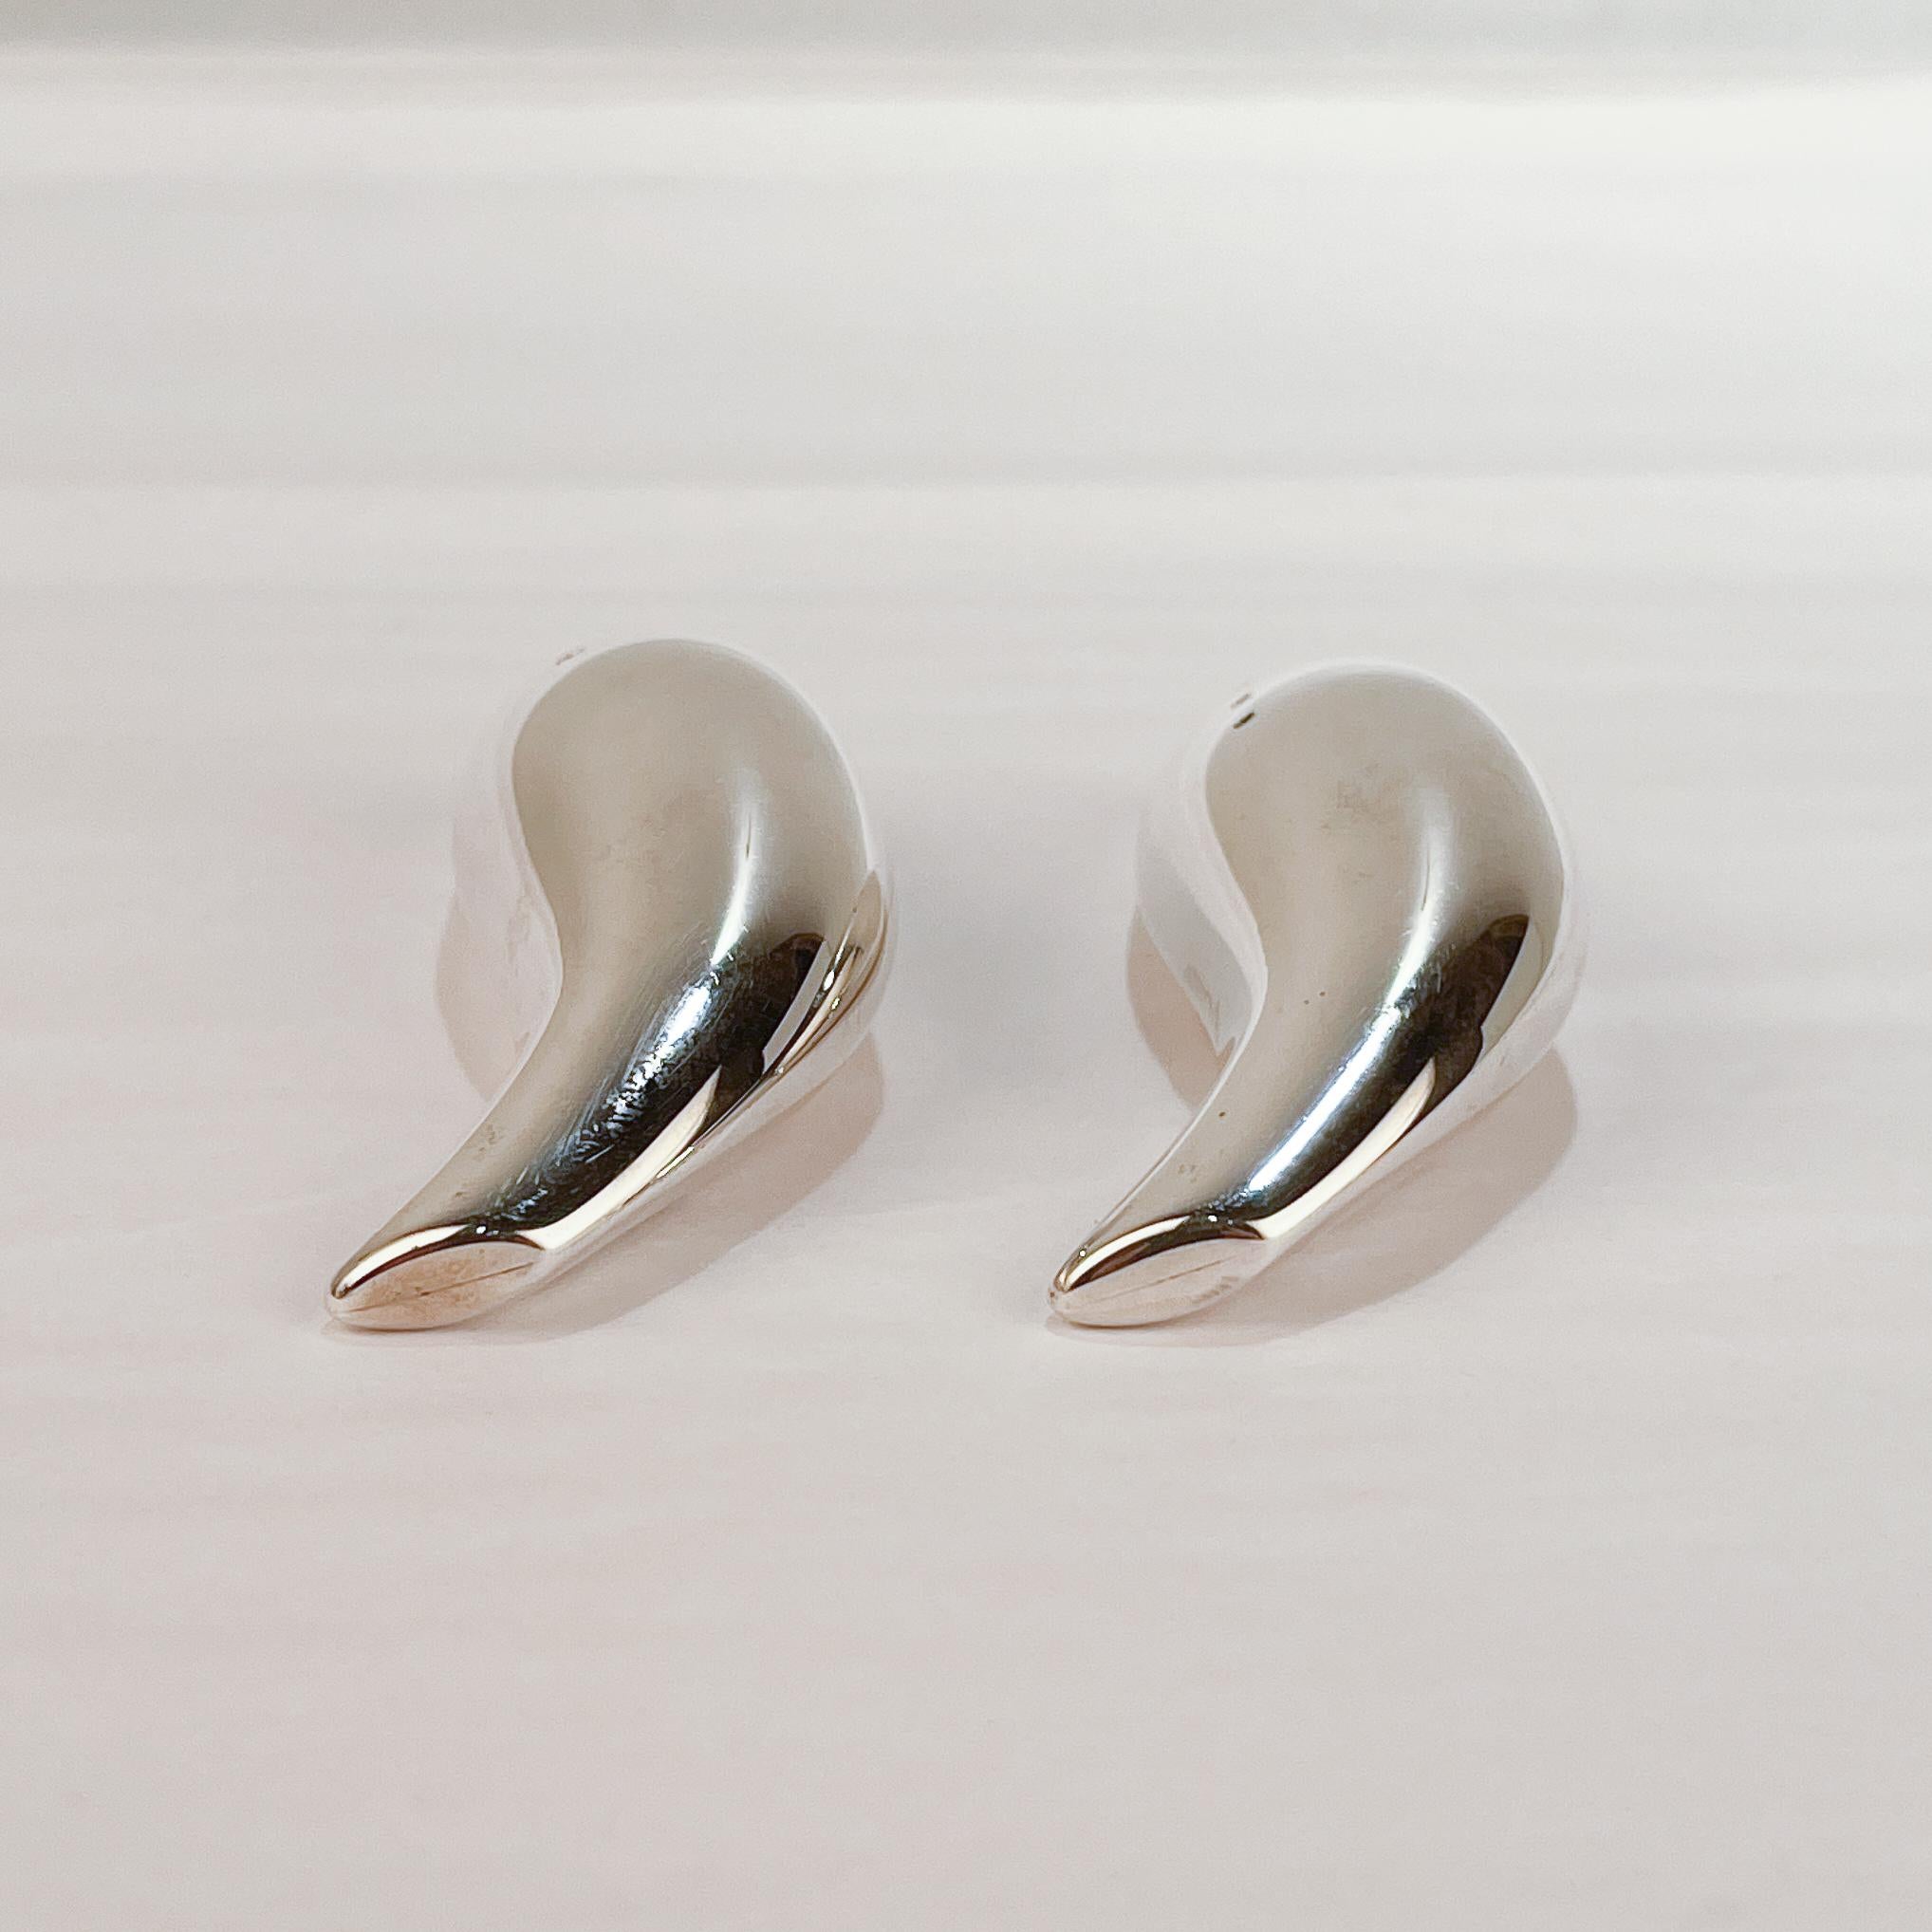 Women's or Men's Tiffany & Co. Sterling Silver 'Fish' Salt & Pepper Shakers by Frank Gehry